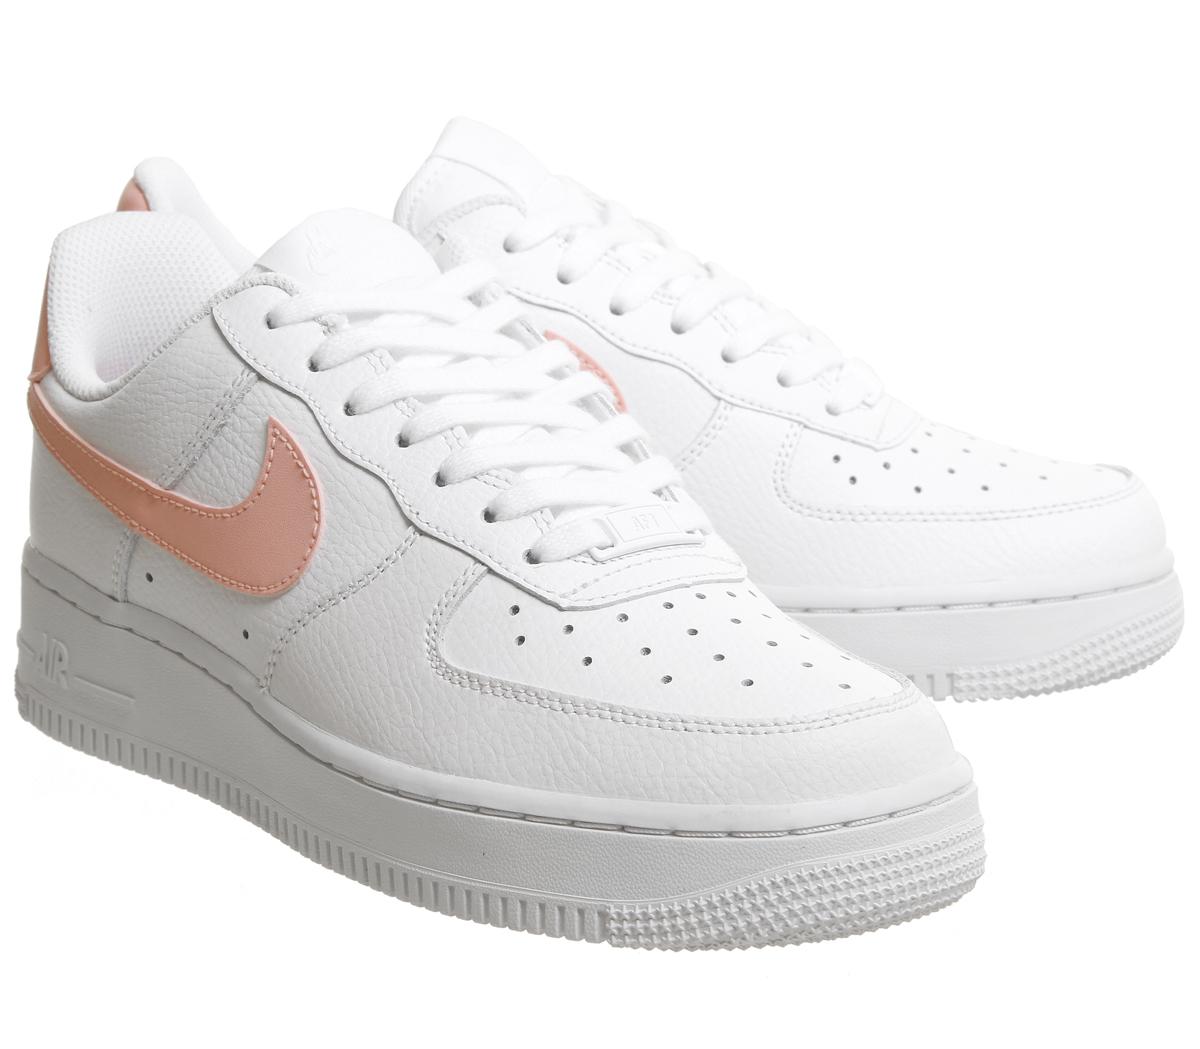 Nike Air Force 1 07 Trainers White Oracle Pink White - Hers trainers